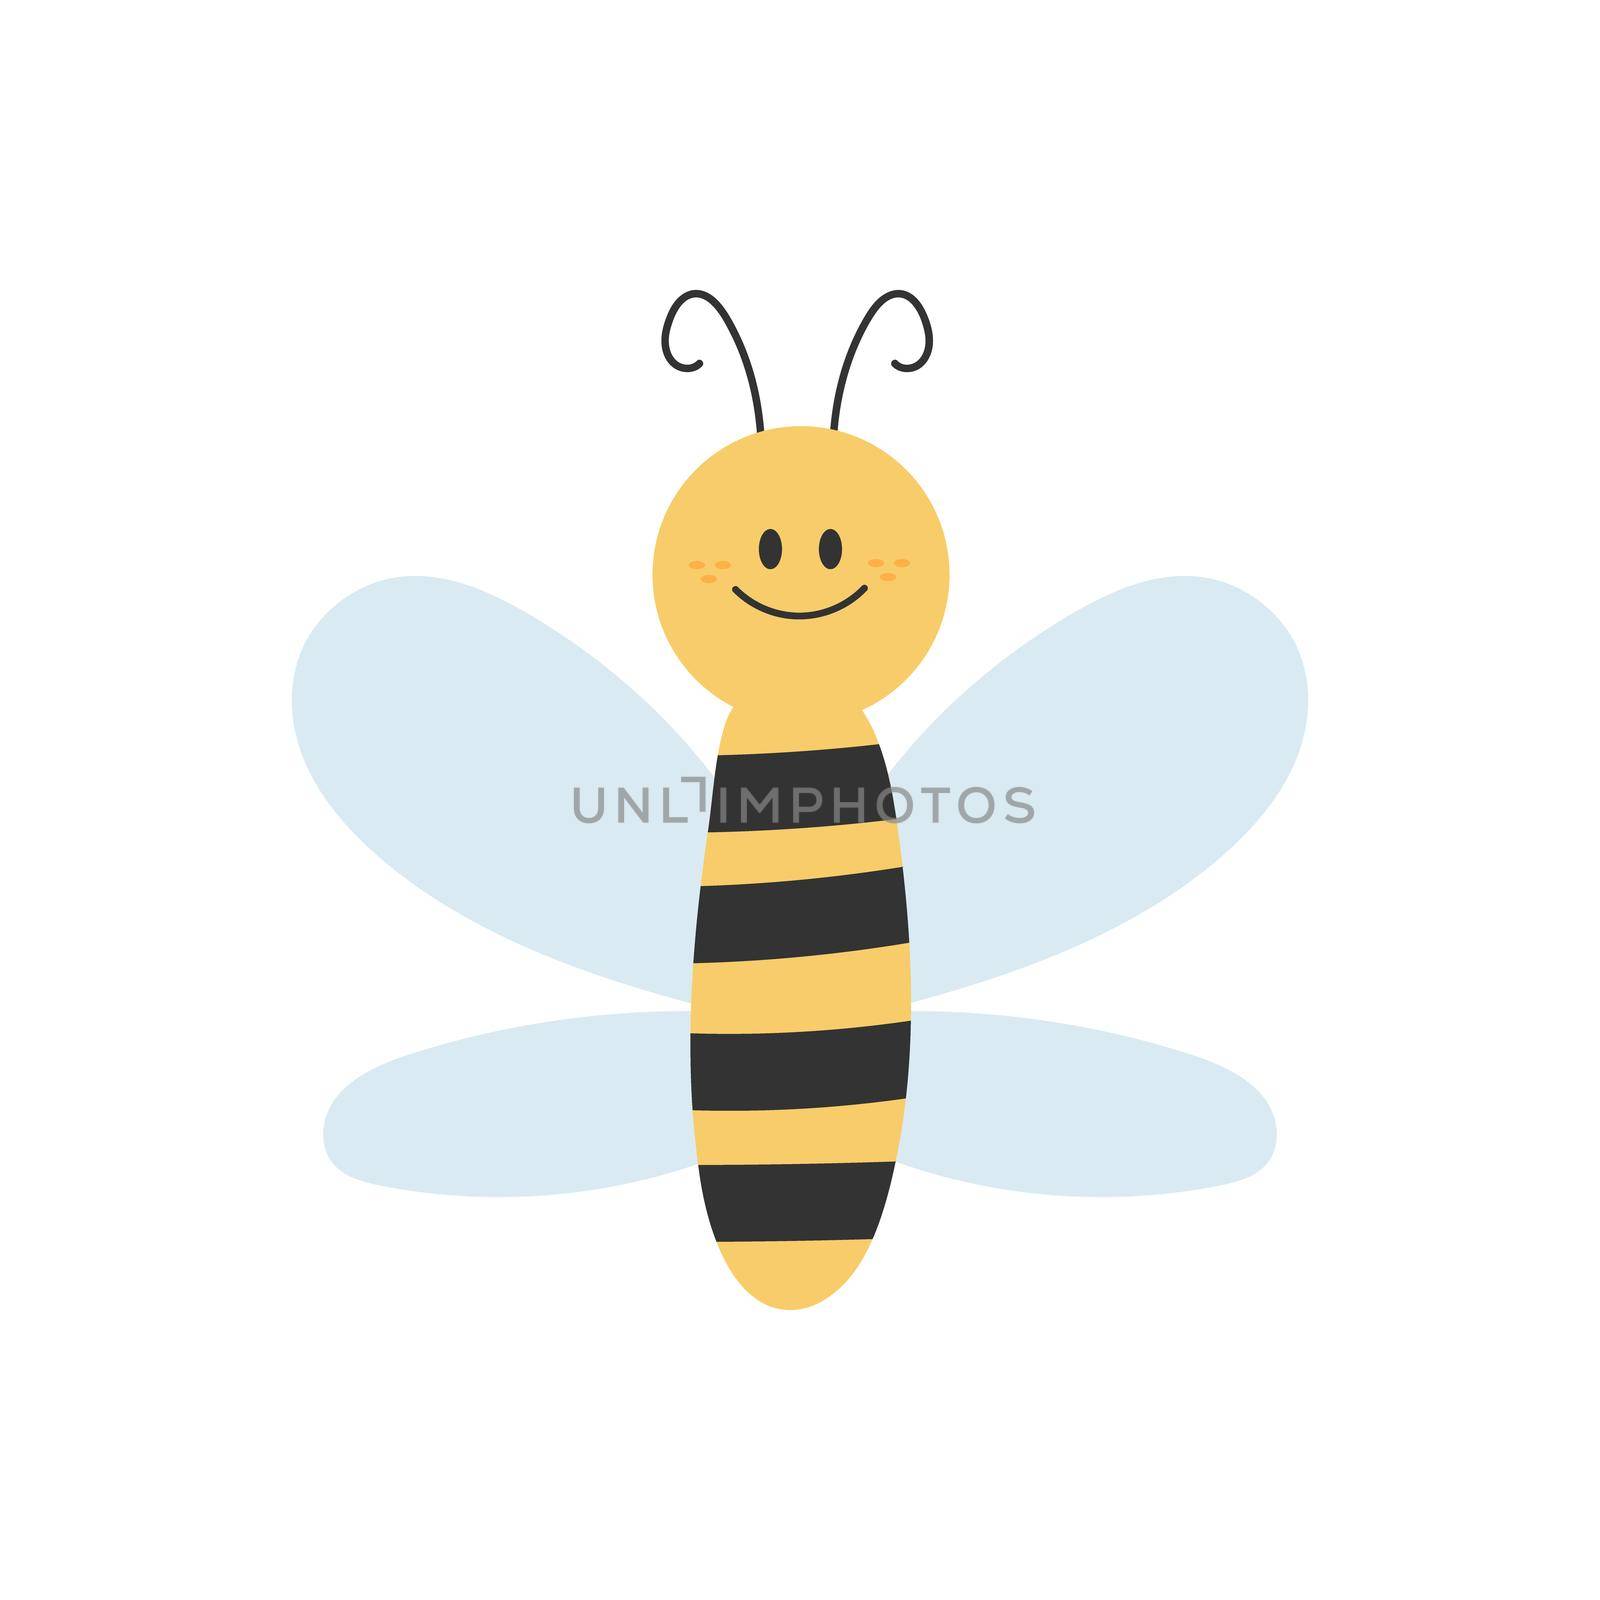 Lovely simple design of a cartoon yellow and black bee on a white background by natali_brill